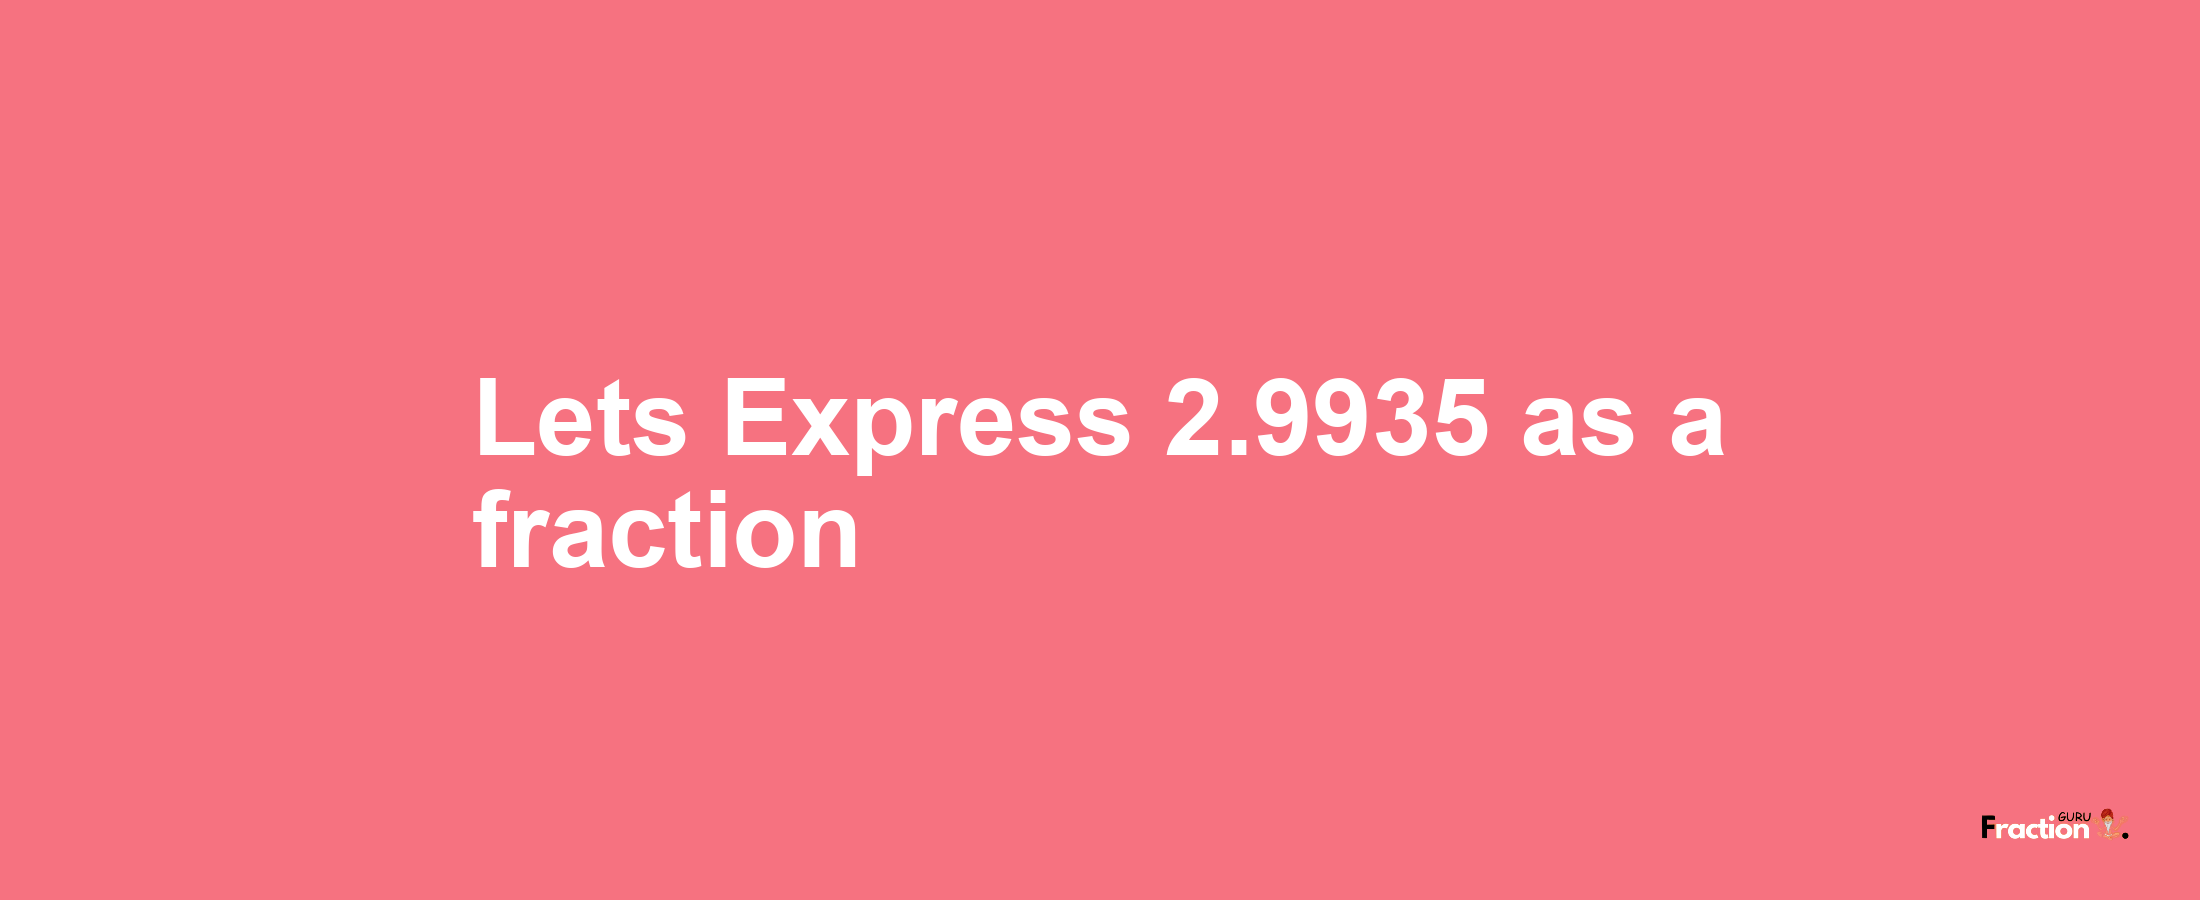 Lets Express 2.9935 as afraction